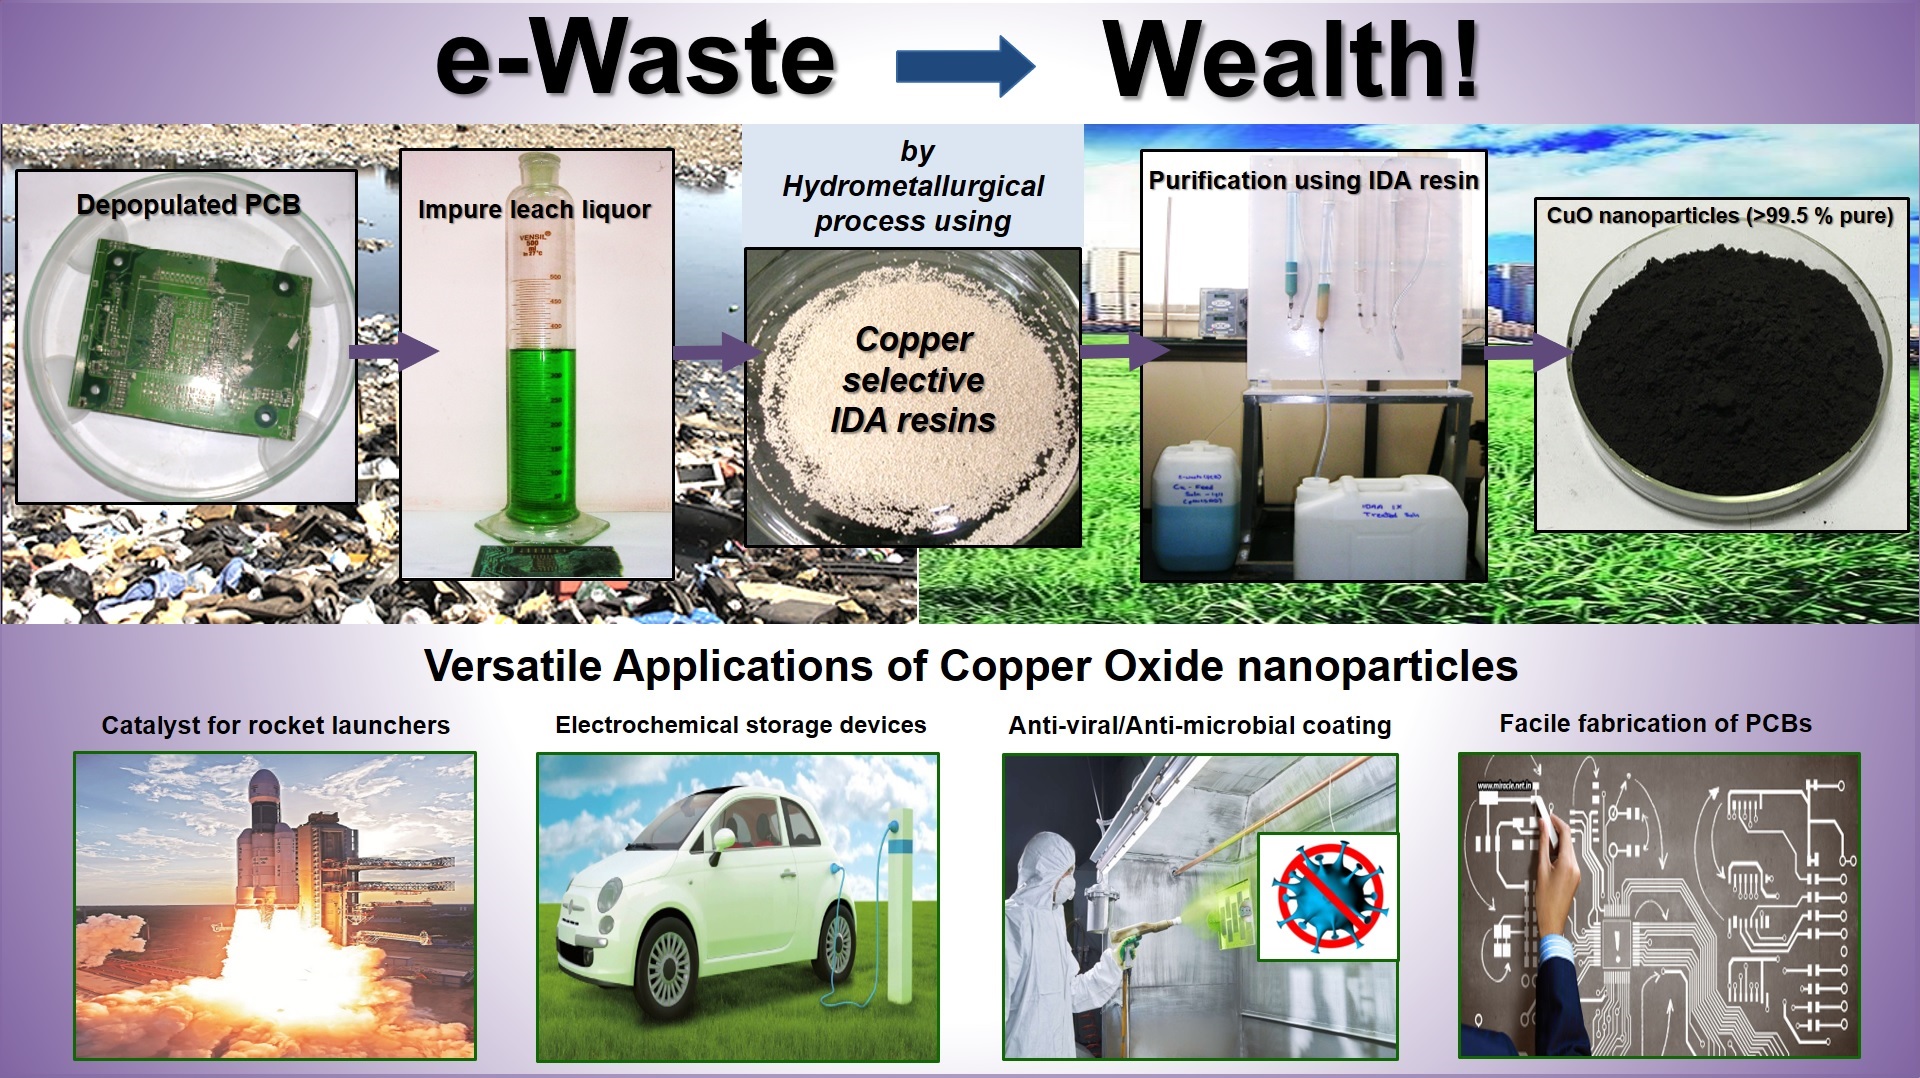 Technology for production of copper oxide nanoparticles from e-waste PCBs